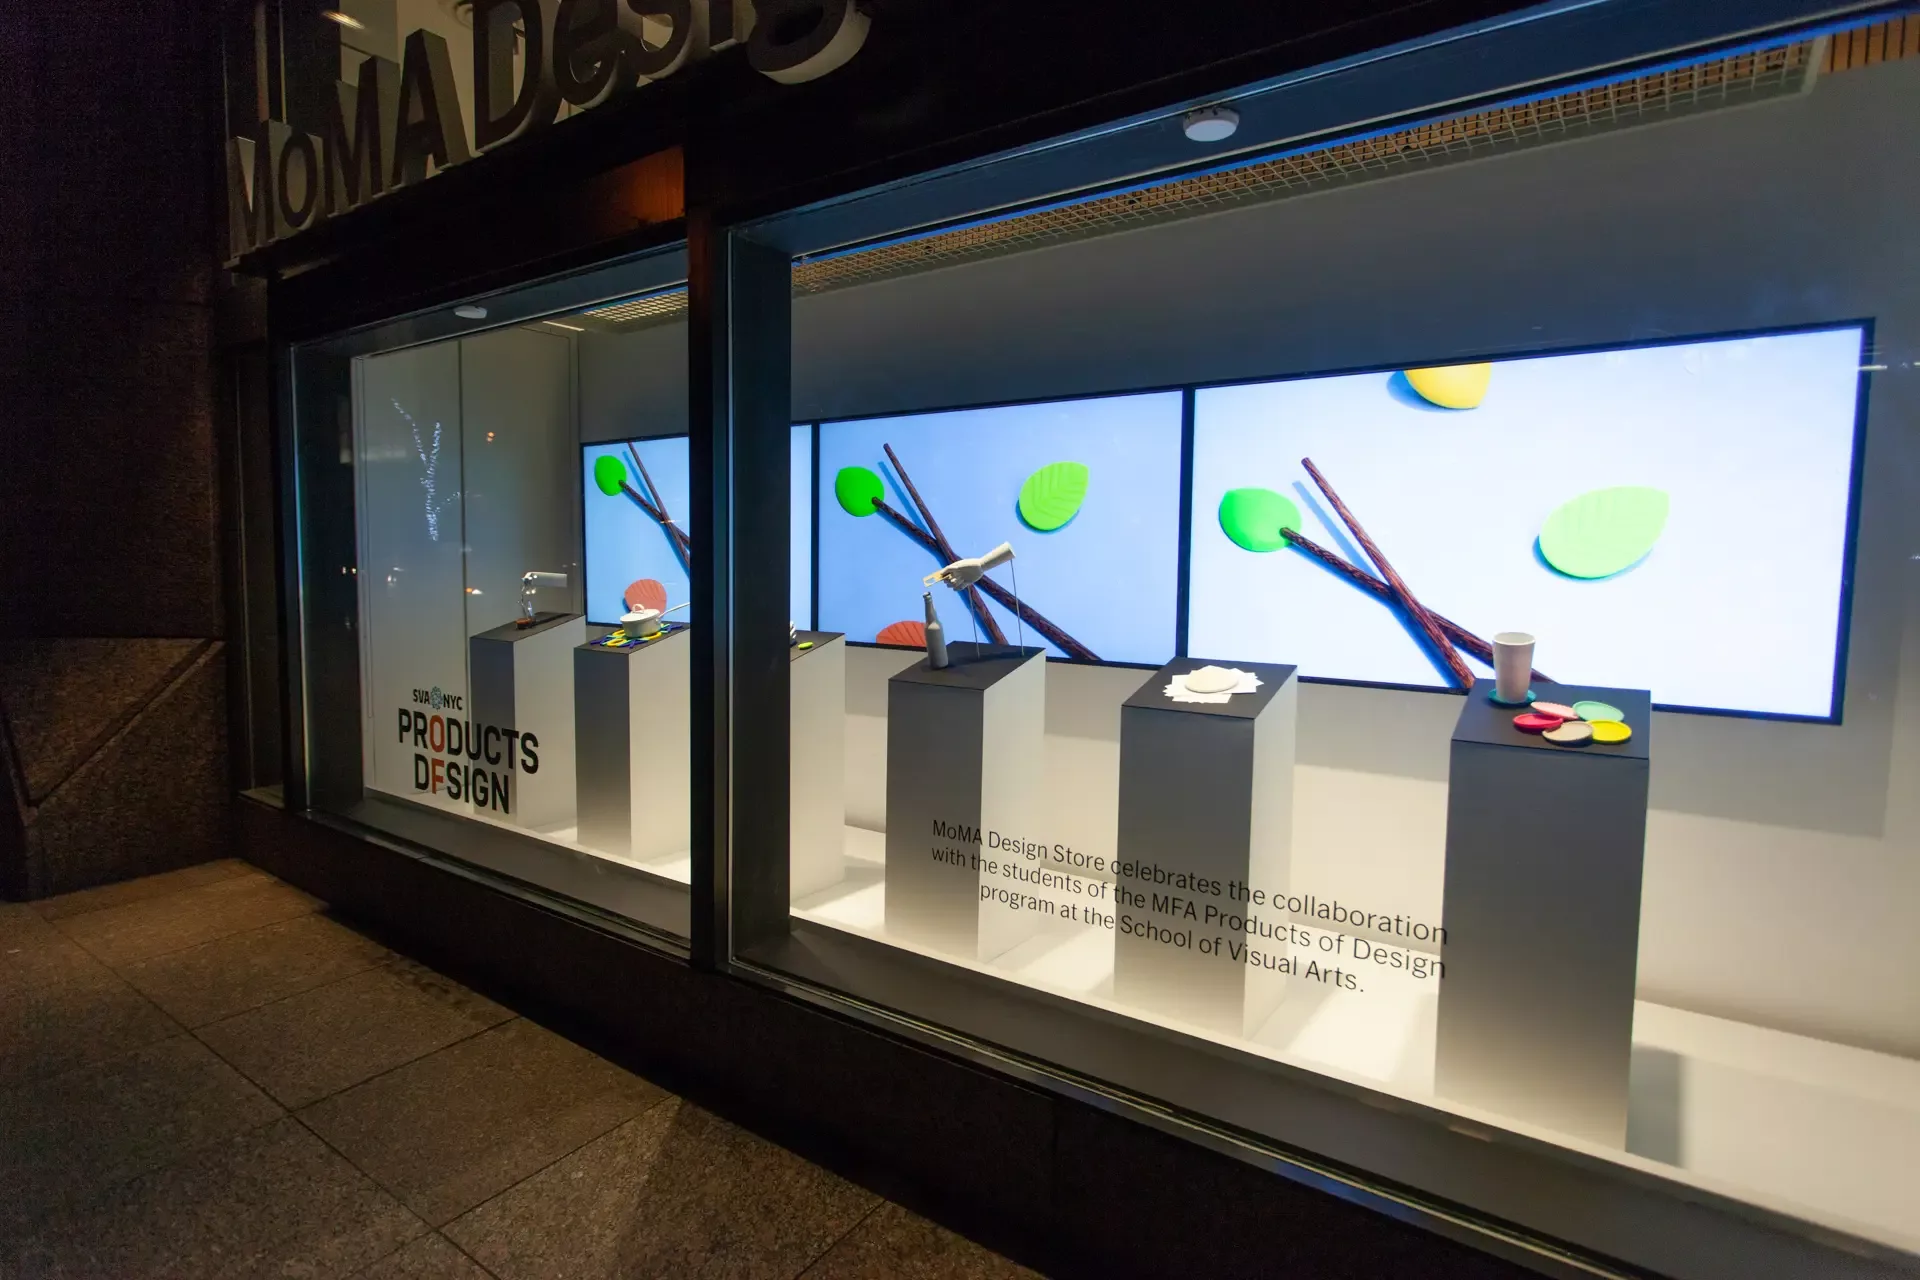 A picture of the Midtown Manhattan MoMA Design Store featuring the Ambi Chopsticks and Holders advertising.